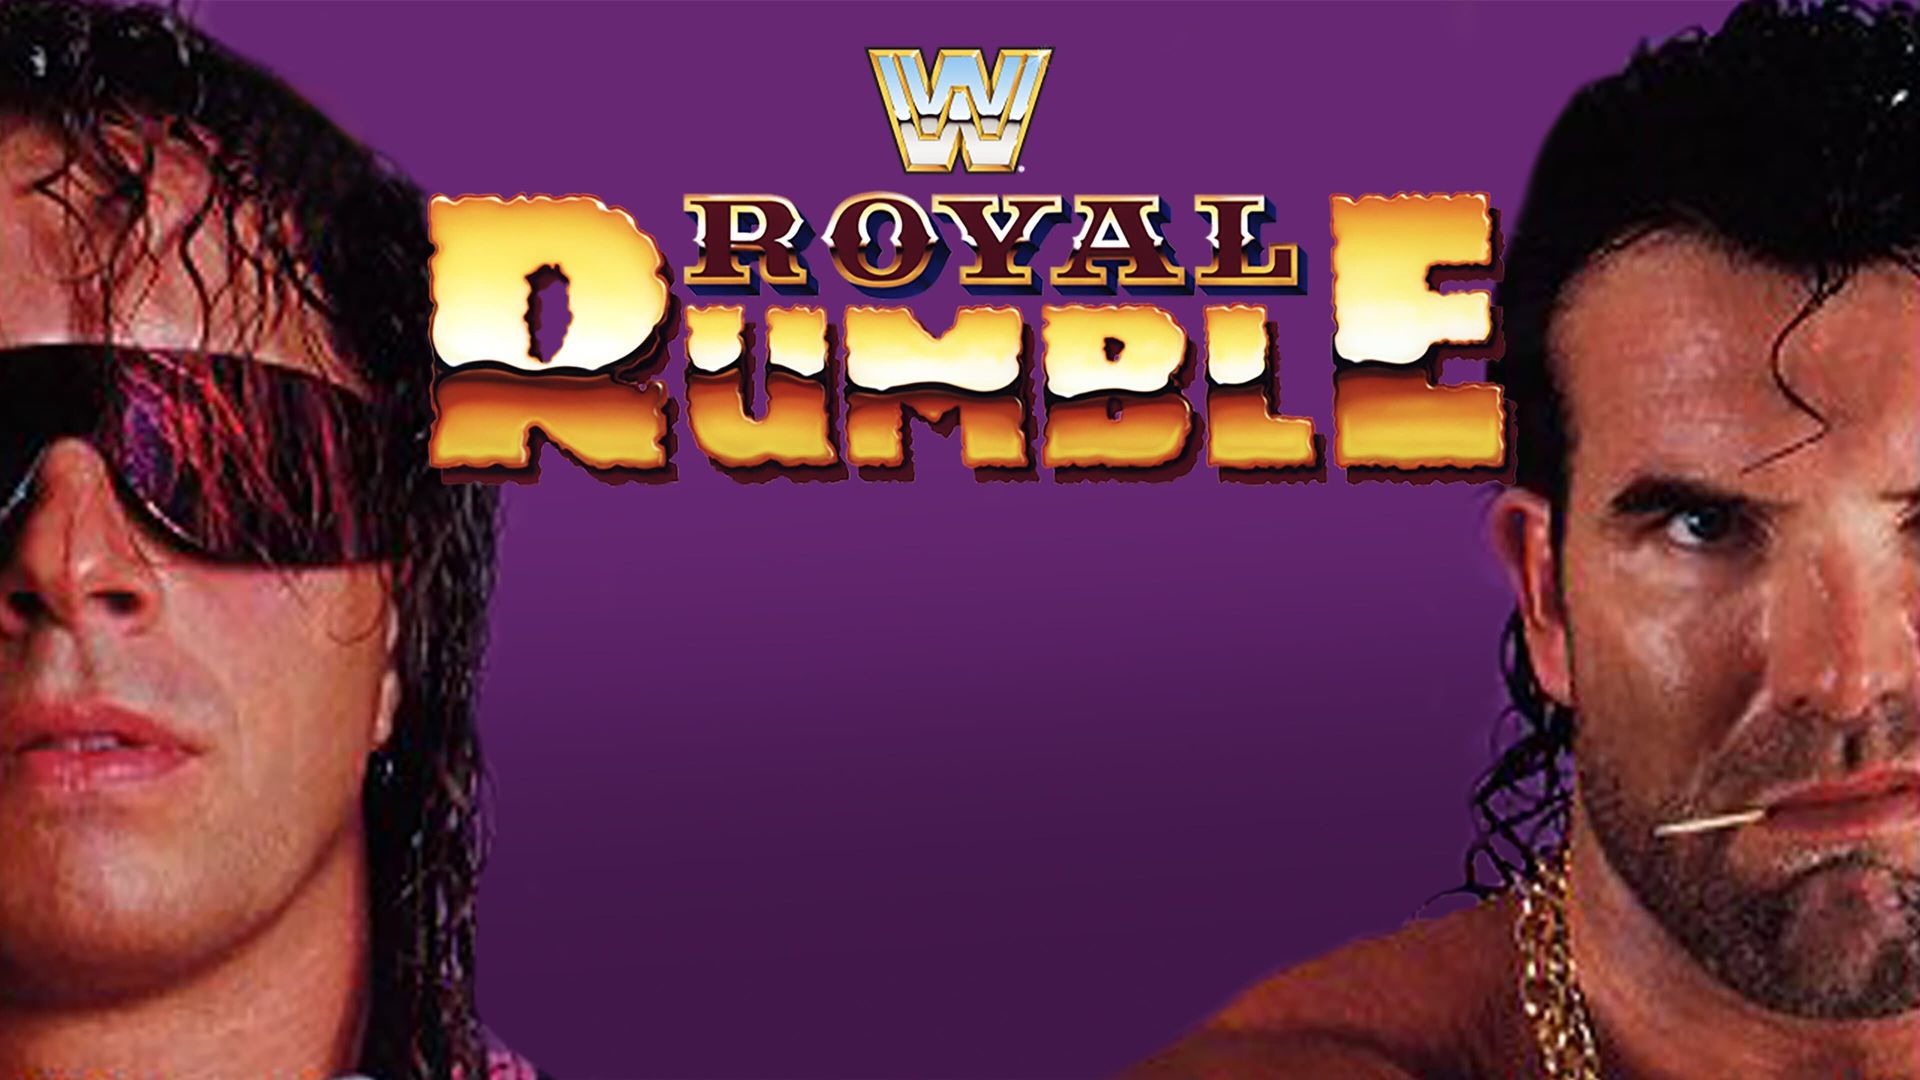 Royal Rumble background